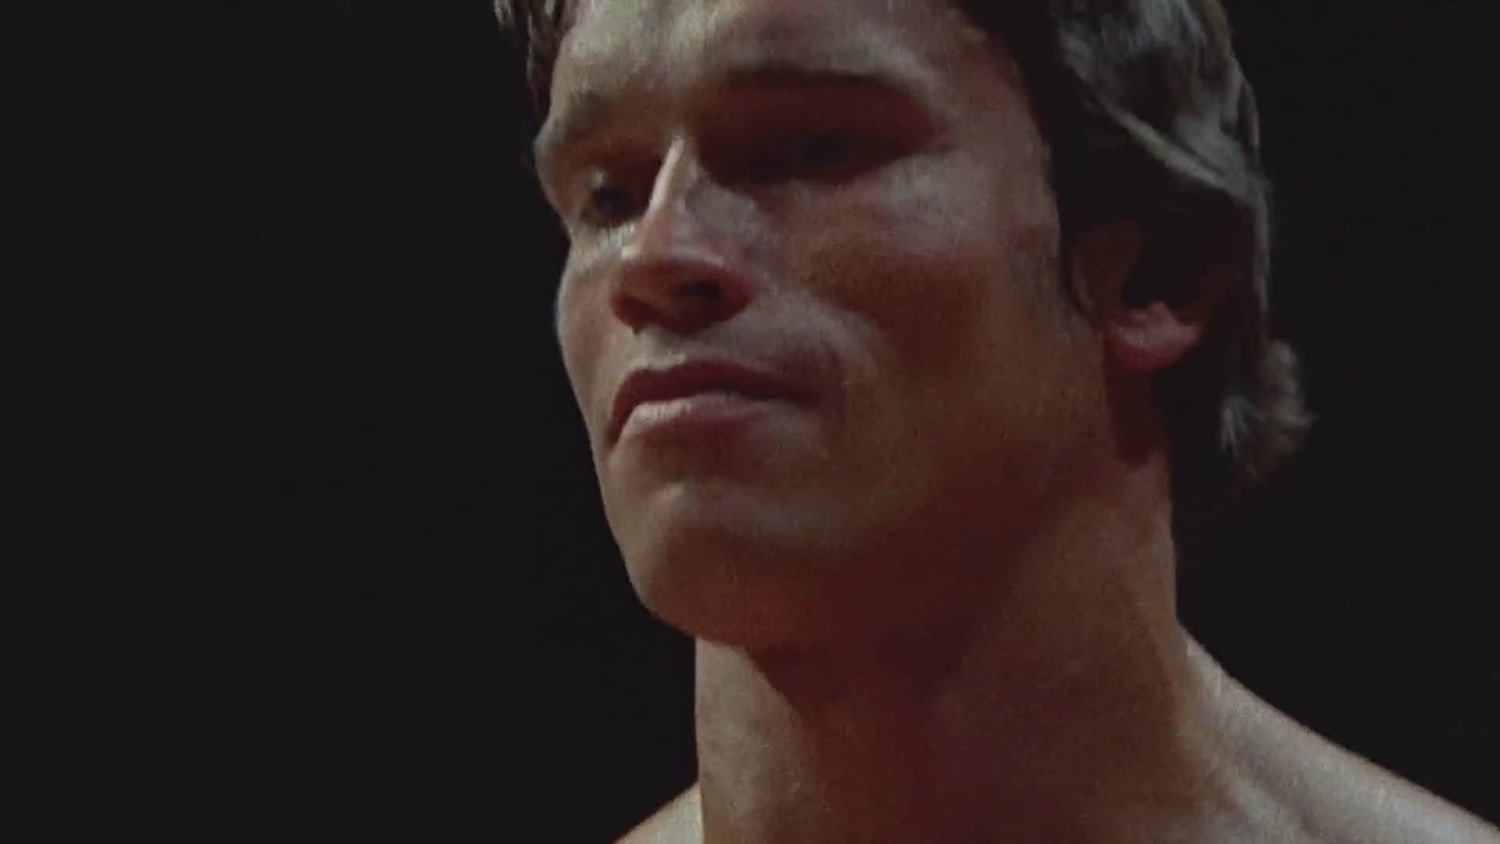 Arnold at the 1975 Mr.Olympia, it's the only HD footage I could find of him posing on stage. Thoughts?